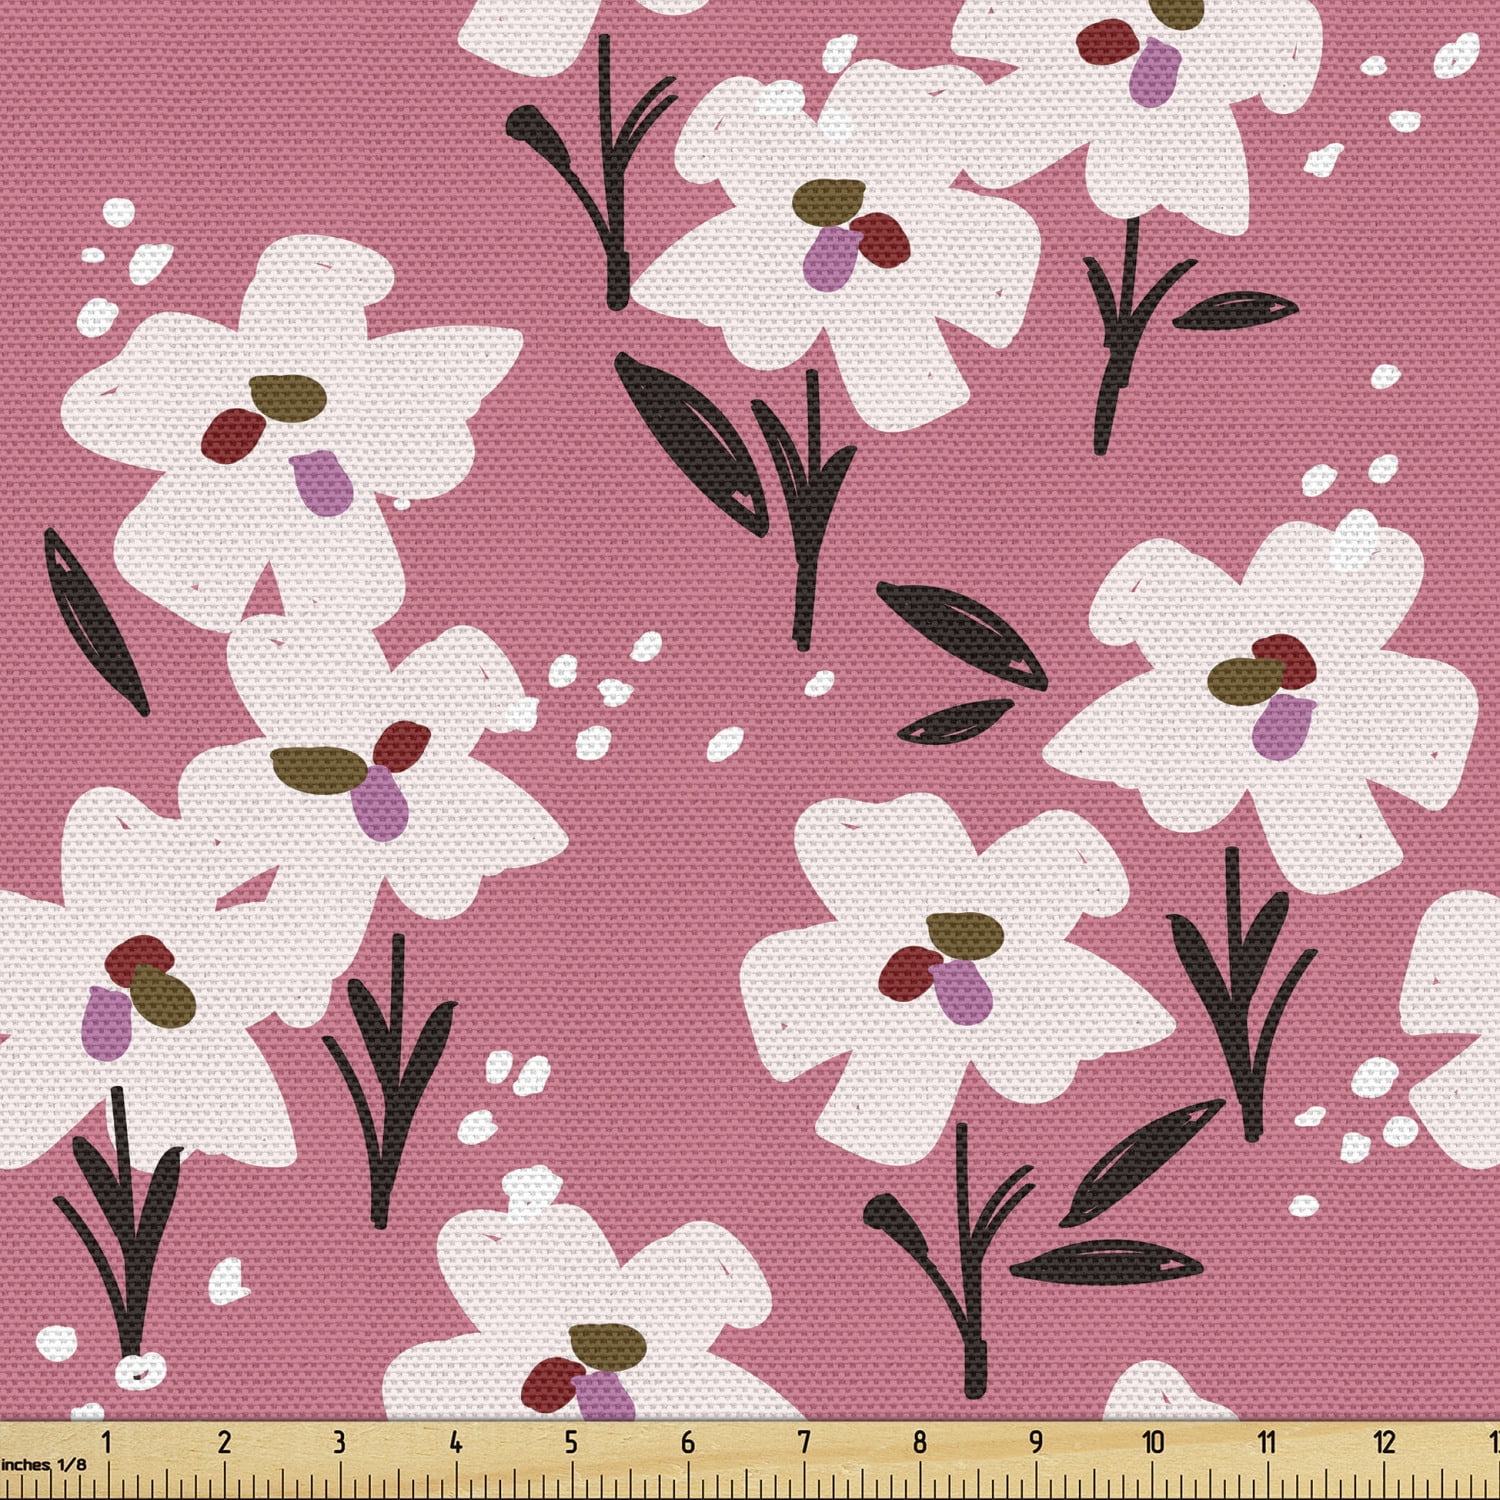 Hyacinth Patterned Digital Printed Fabric Home Decor Upholstery Fabric